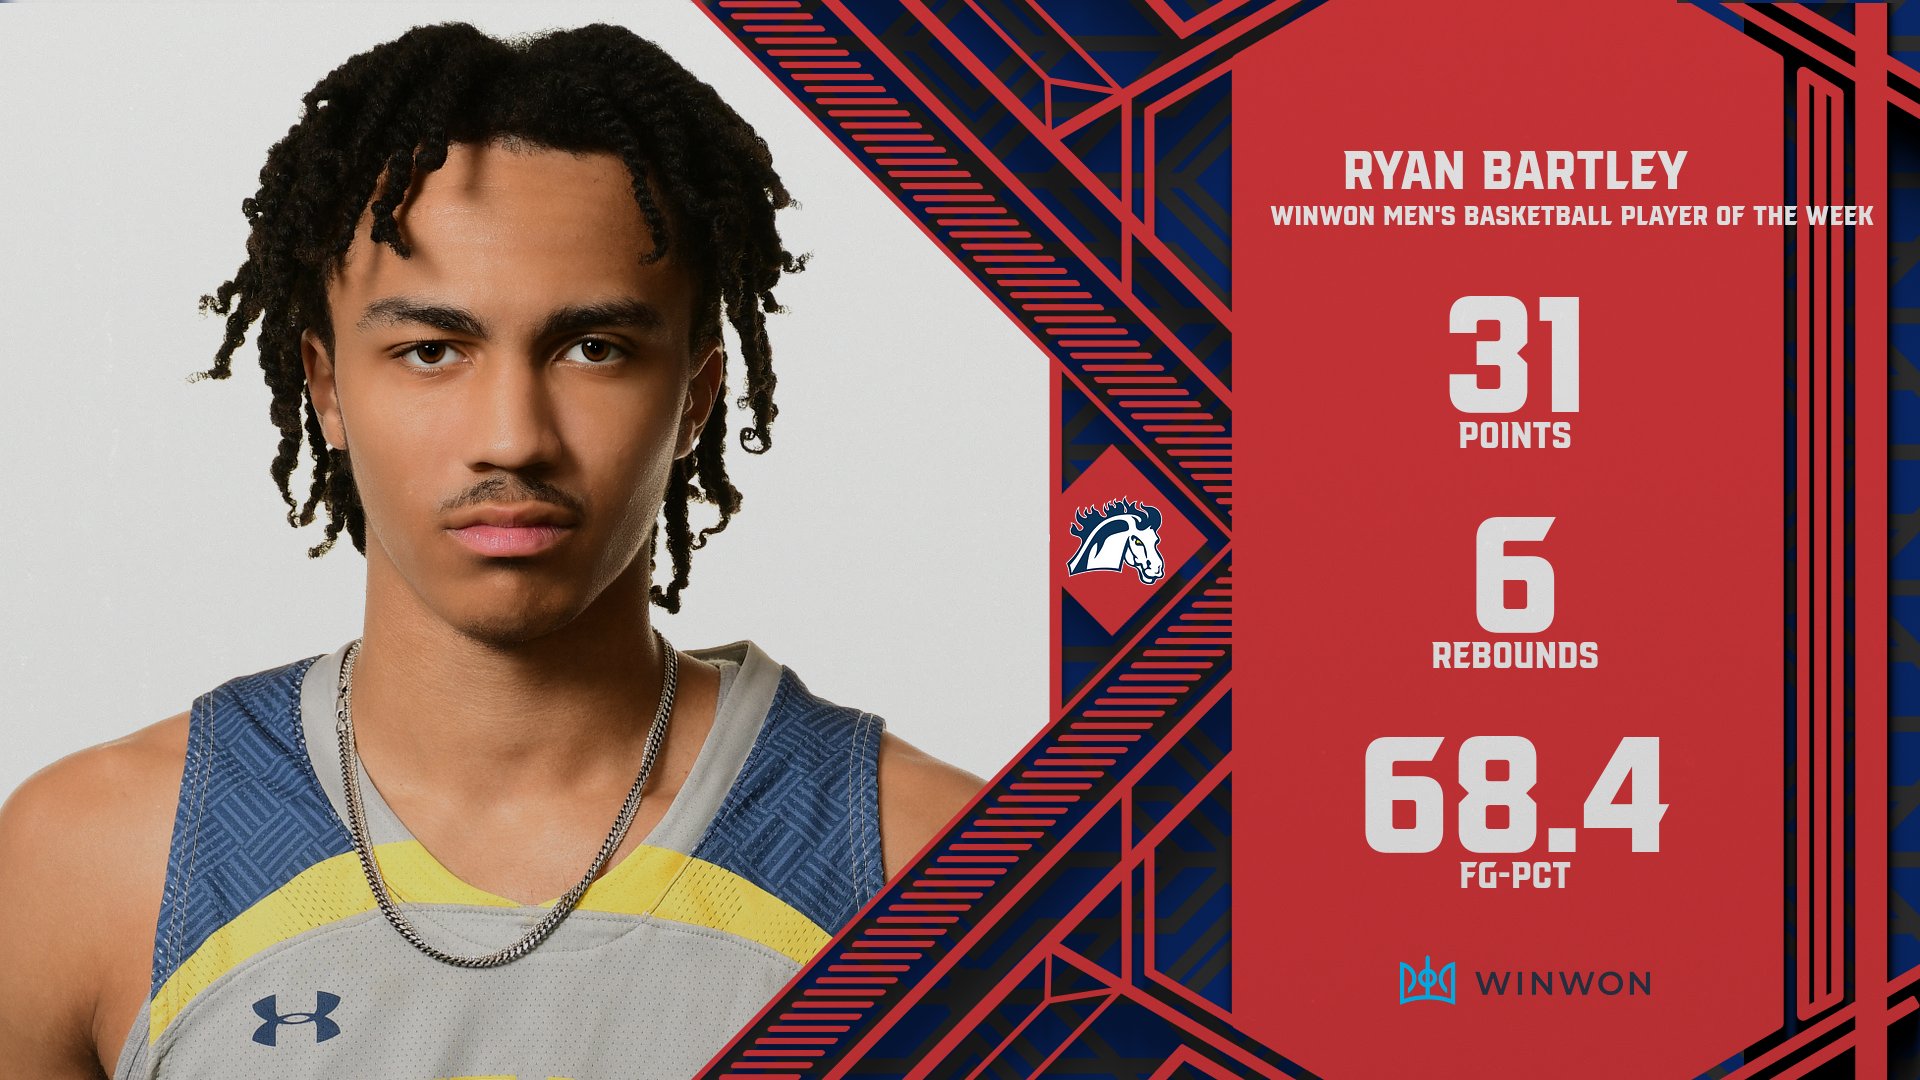 Mount Mercy’s Ryan Bartley Named WinWon Men’s Basketball Player of the Week